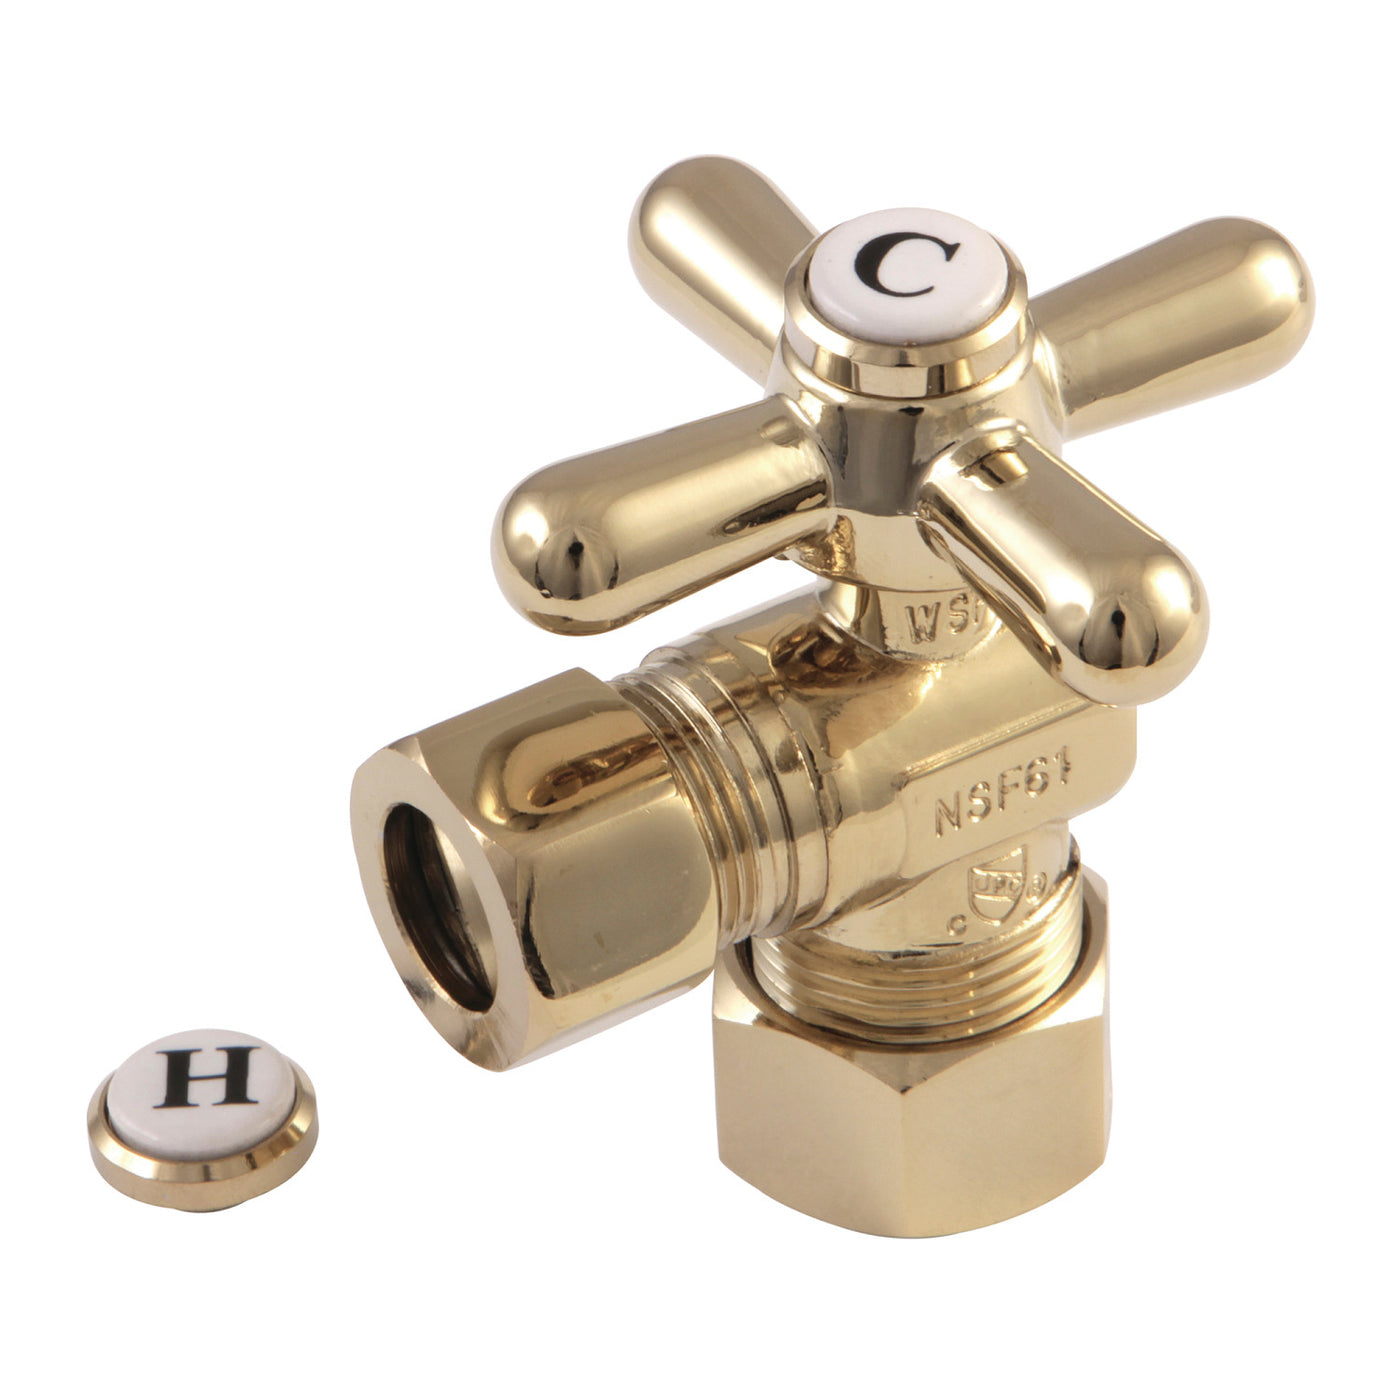 Elements of Design ECC54402X 5/8-Inch OD Comp x 1/2-Inch OD Comp Angle Stop Valve, Polished Brass